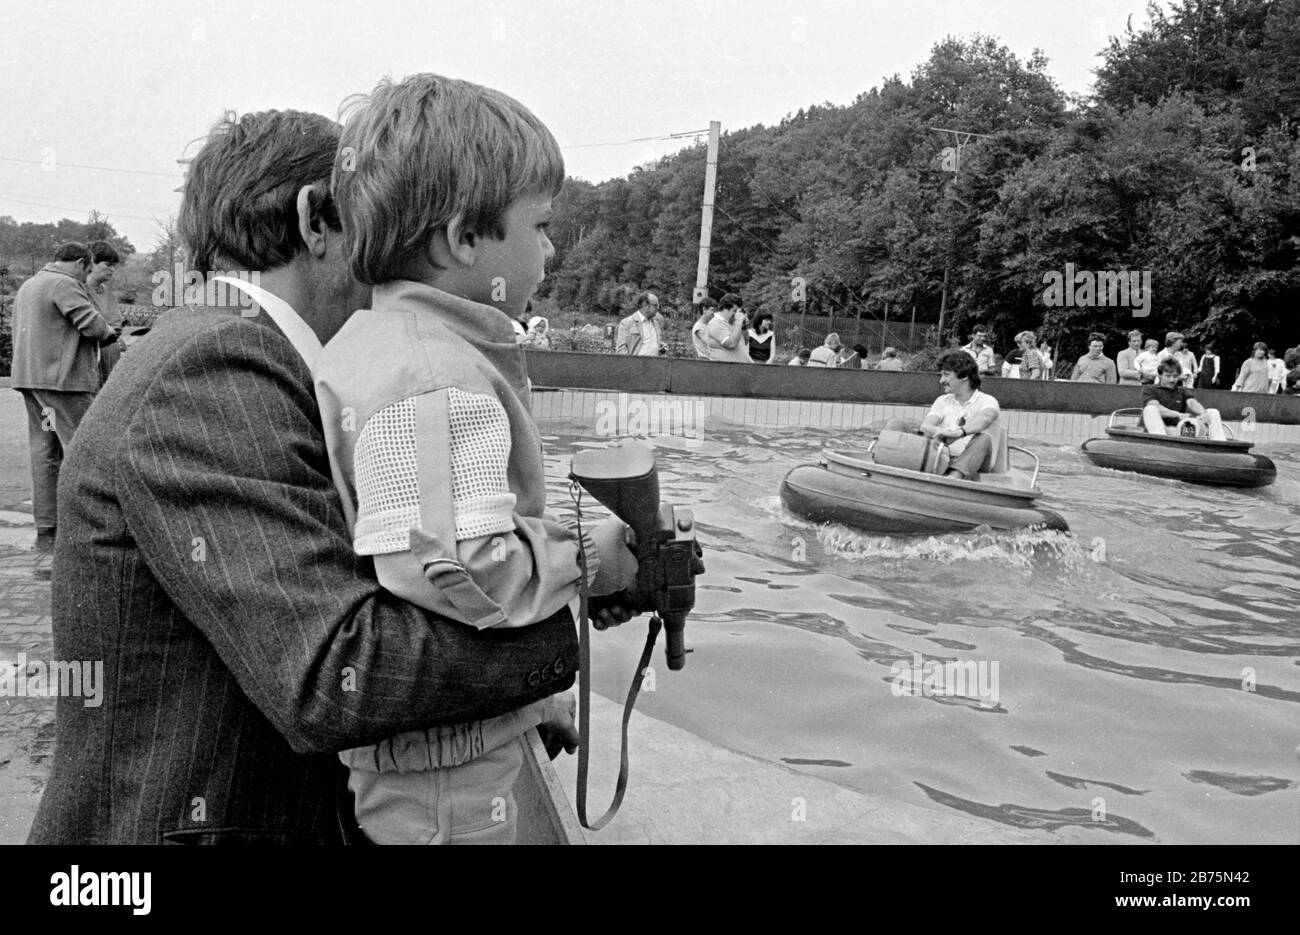 Visitors drive in the Traumlandpark Bottrop Kirchhellen on 25 May 1984, with bumper boats in a water basin. [automated translation] Stock Photo